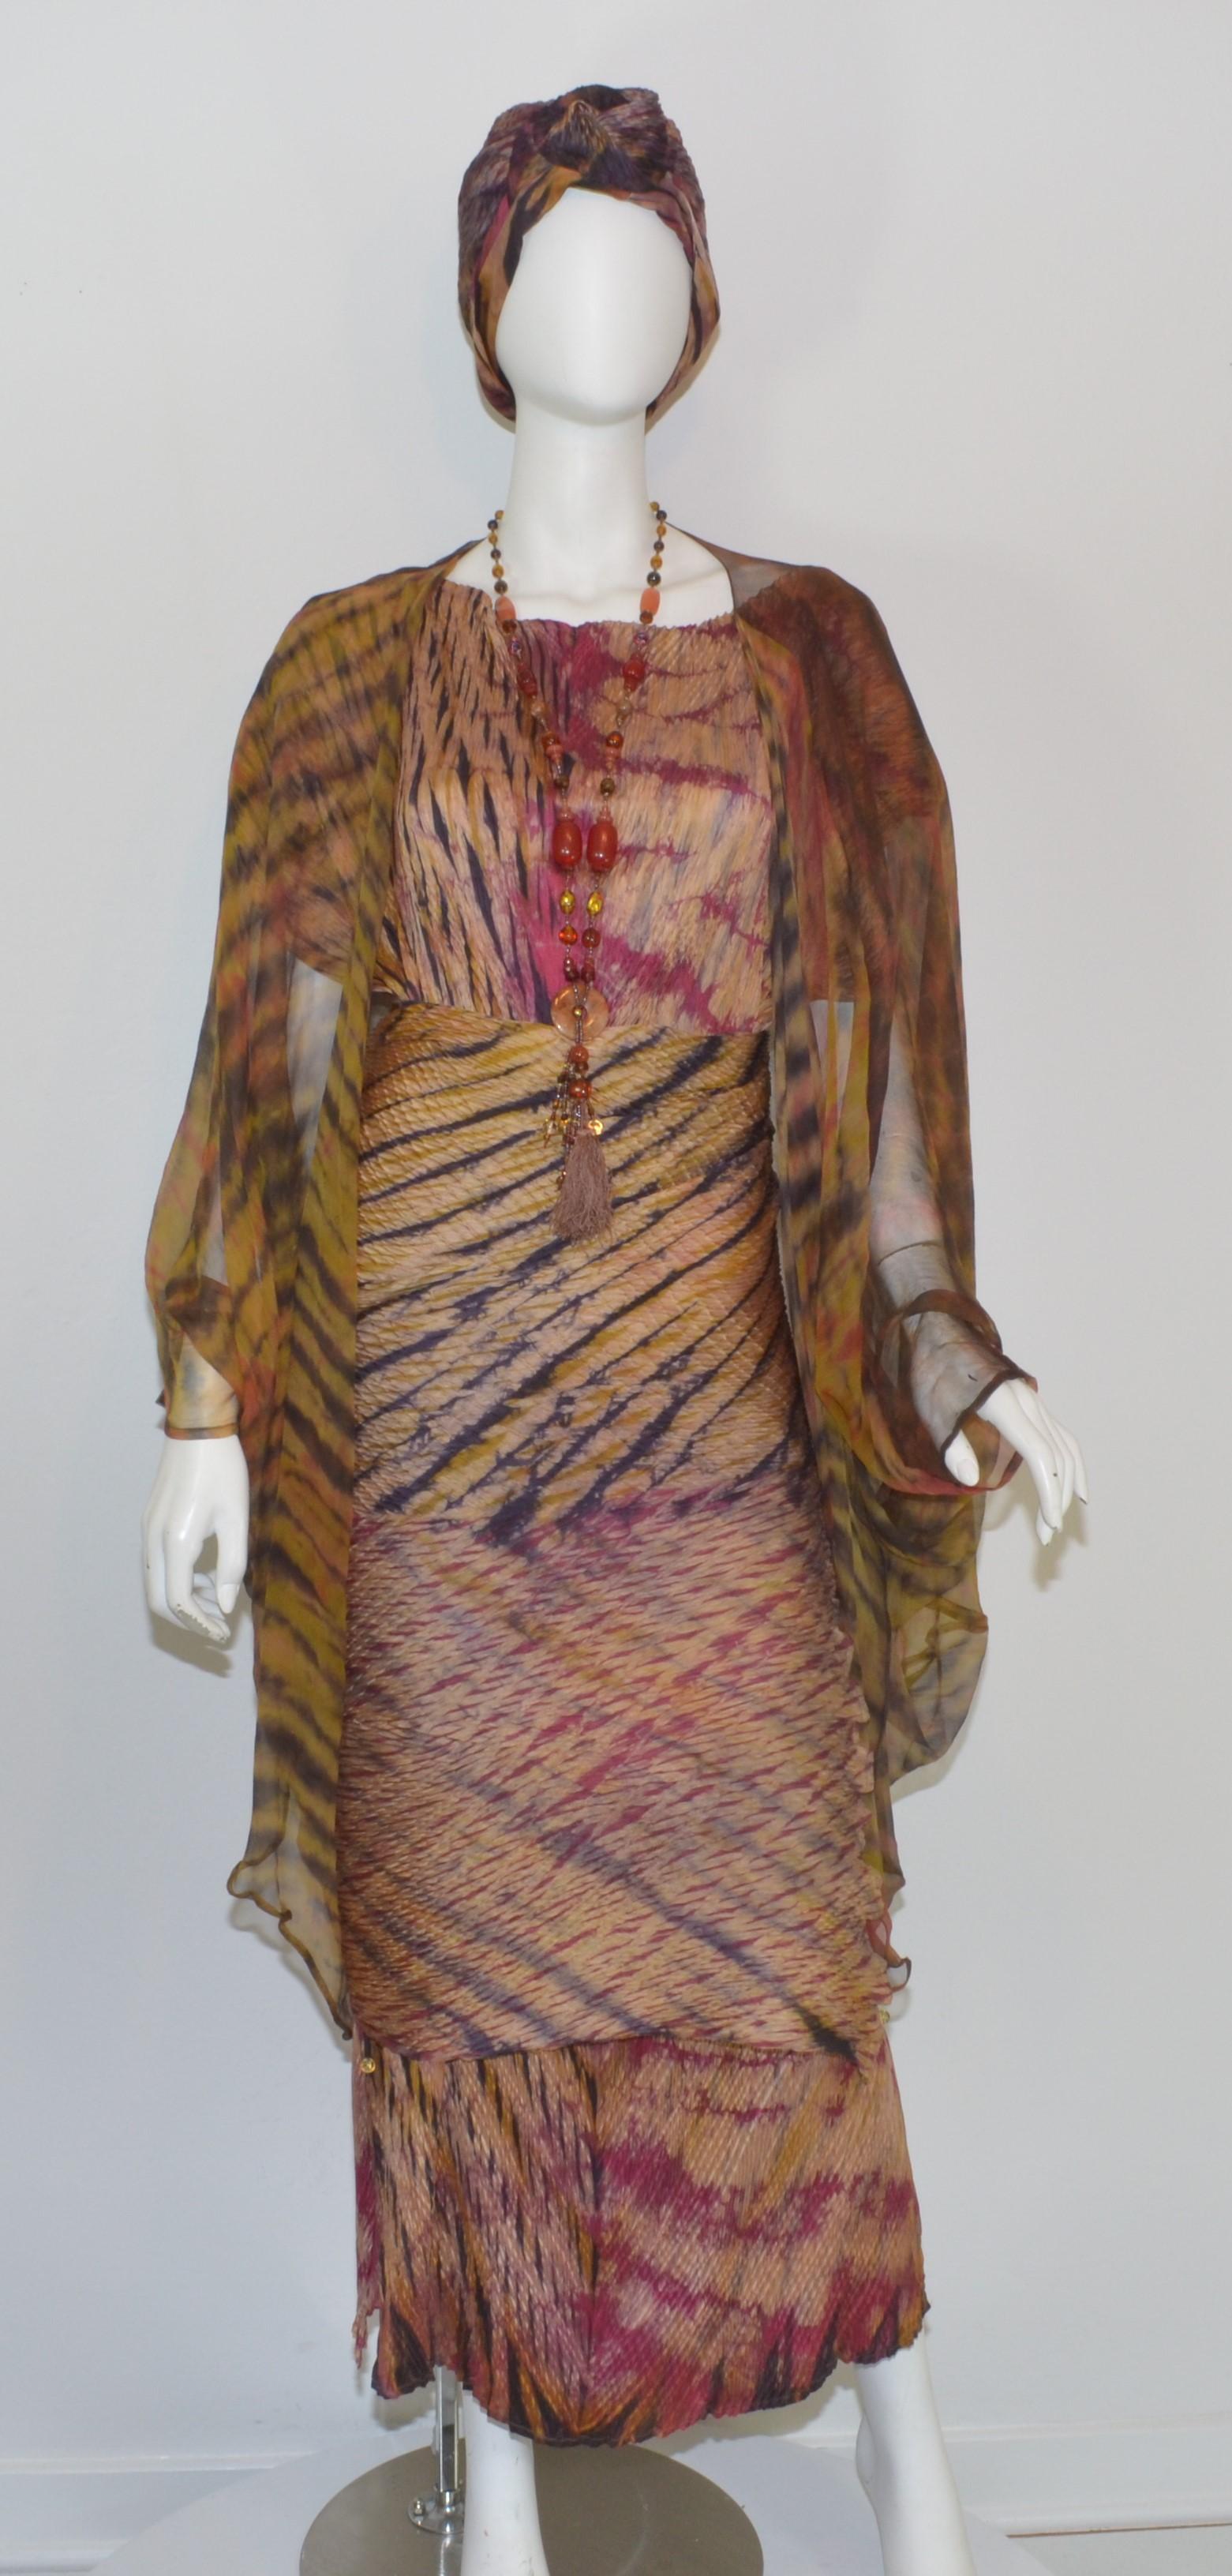 Shibori Maxi Dress Ensemble from the legendary San Francisco Art to Wear Mecca, Obiko. Ensemble includes 4 pieces. : turban style head piece, with Head Piece, Necklace, dress, chiffon duster vest. Fabric is hand dyed silk in the shibori tradition